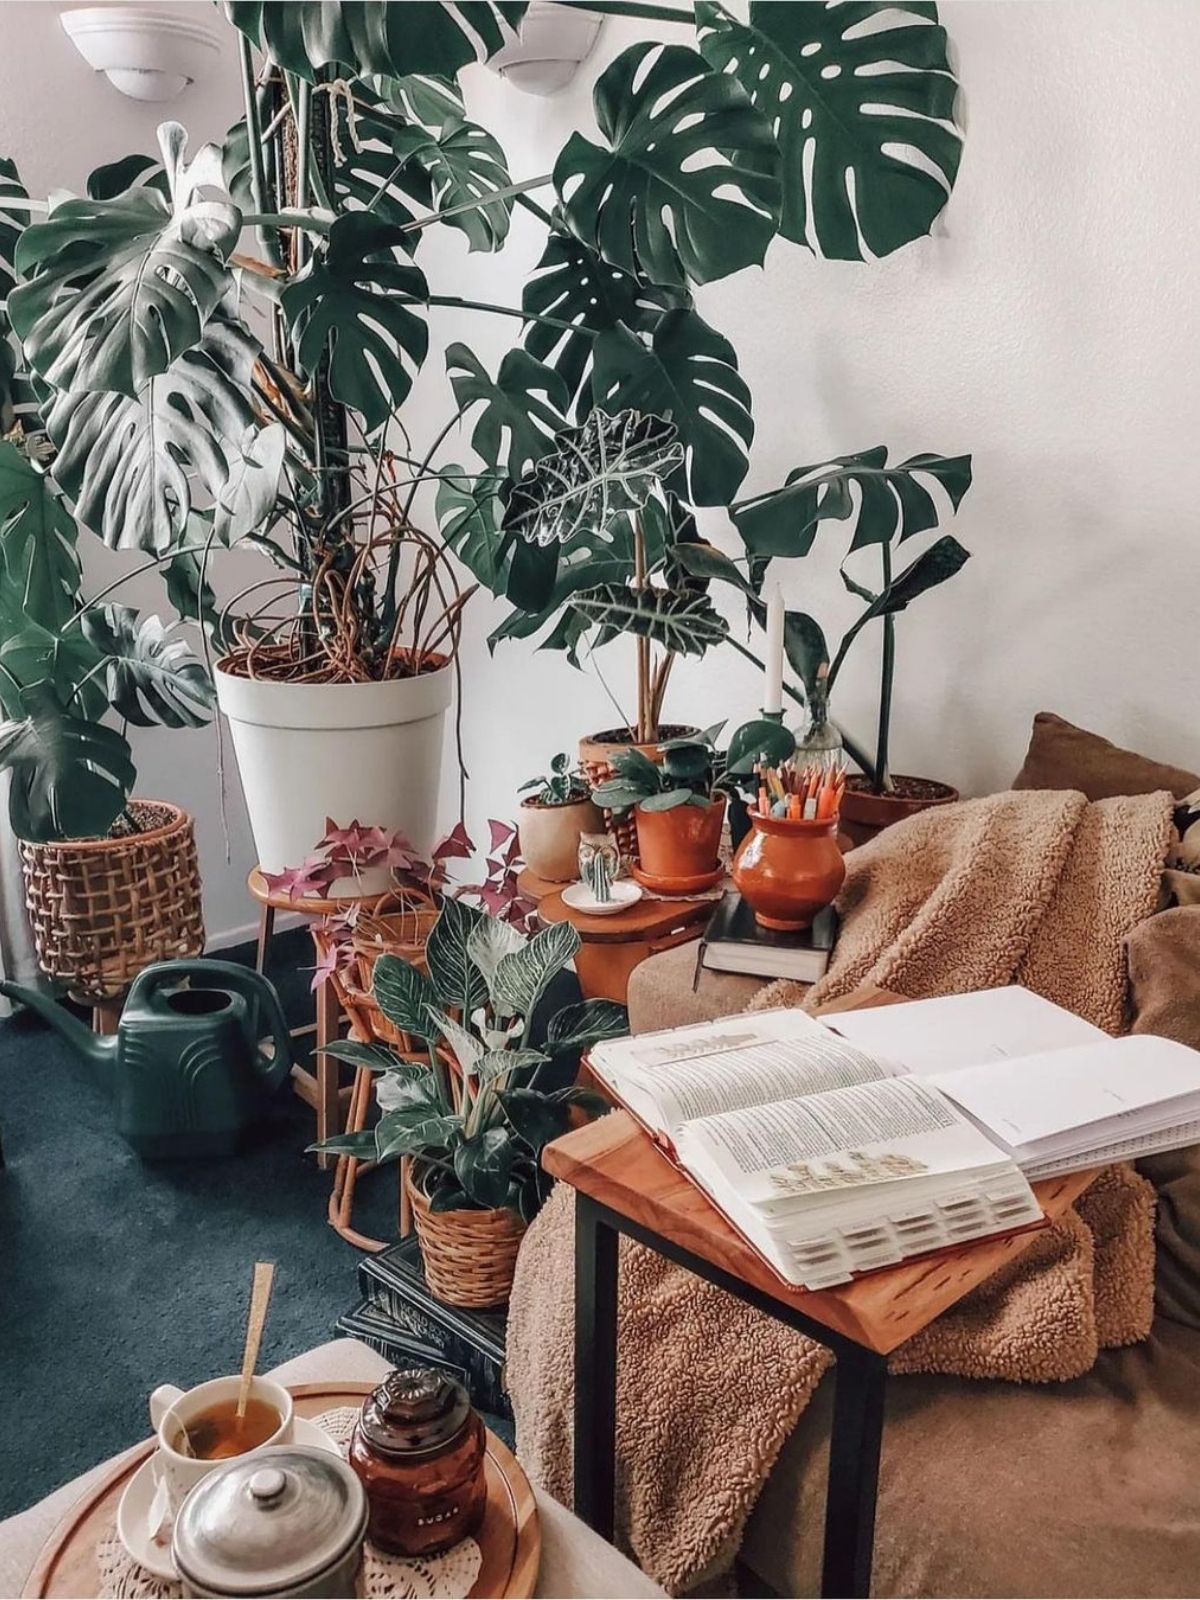 Cozy corner with plants and cushions